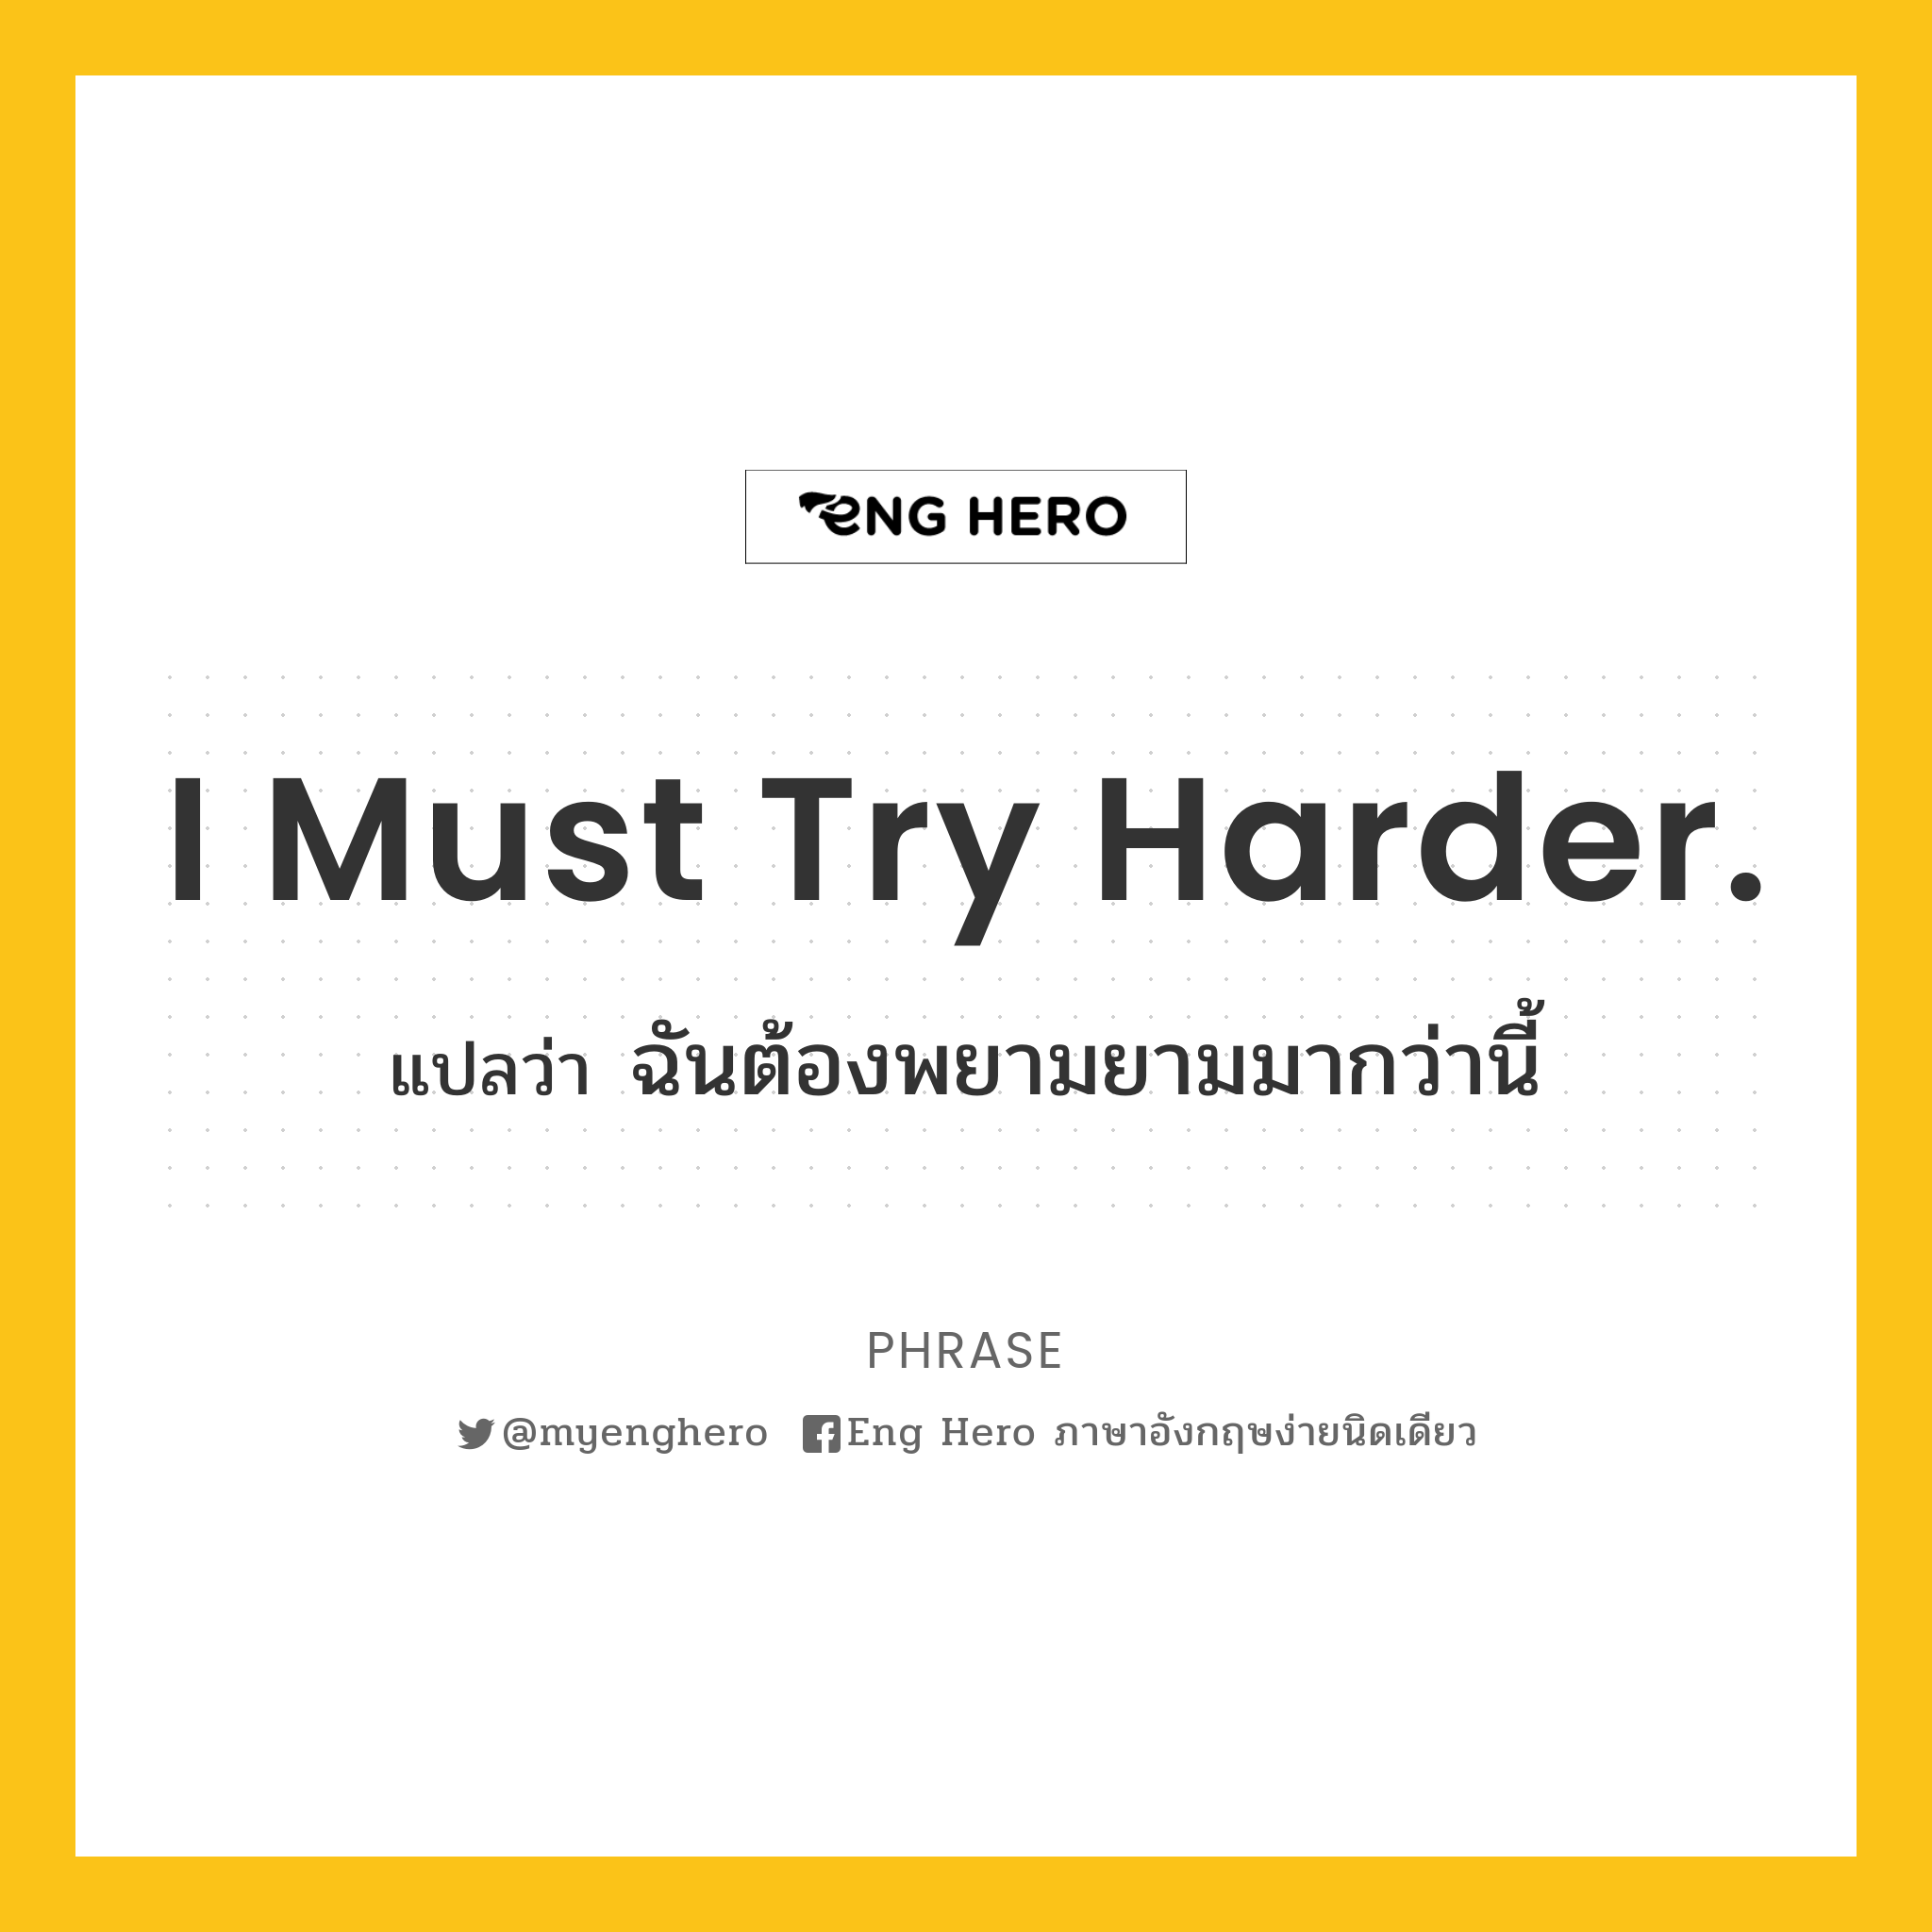 I must try harder.